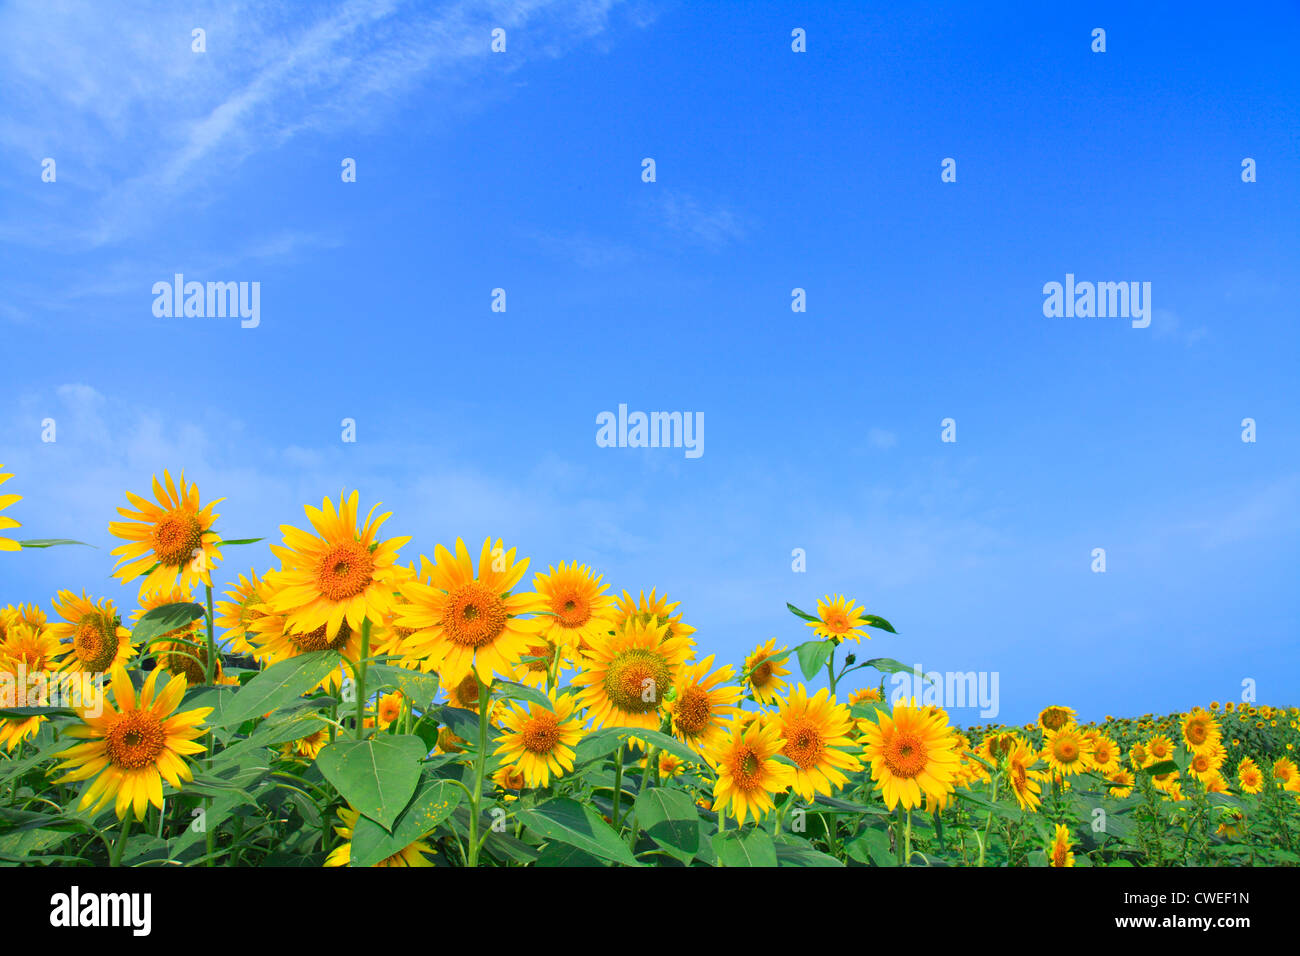 Sunflower Field And Blue Sky In Background Stock Photo